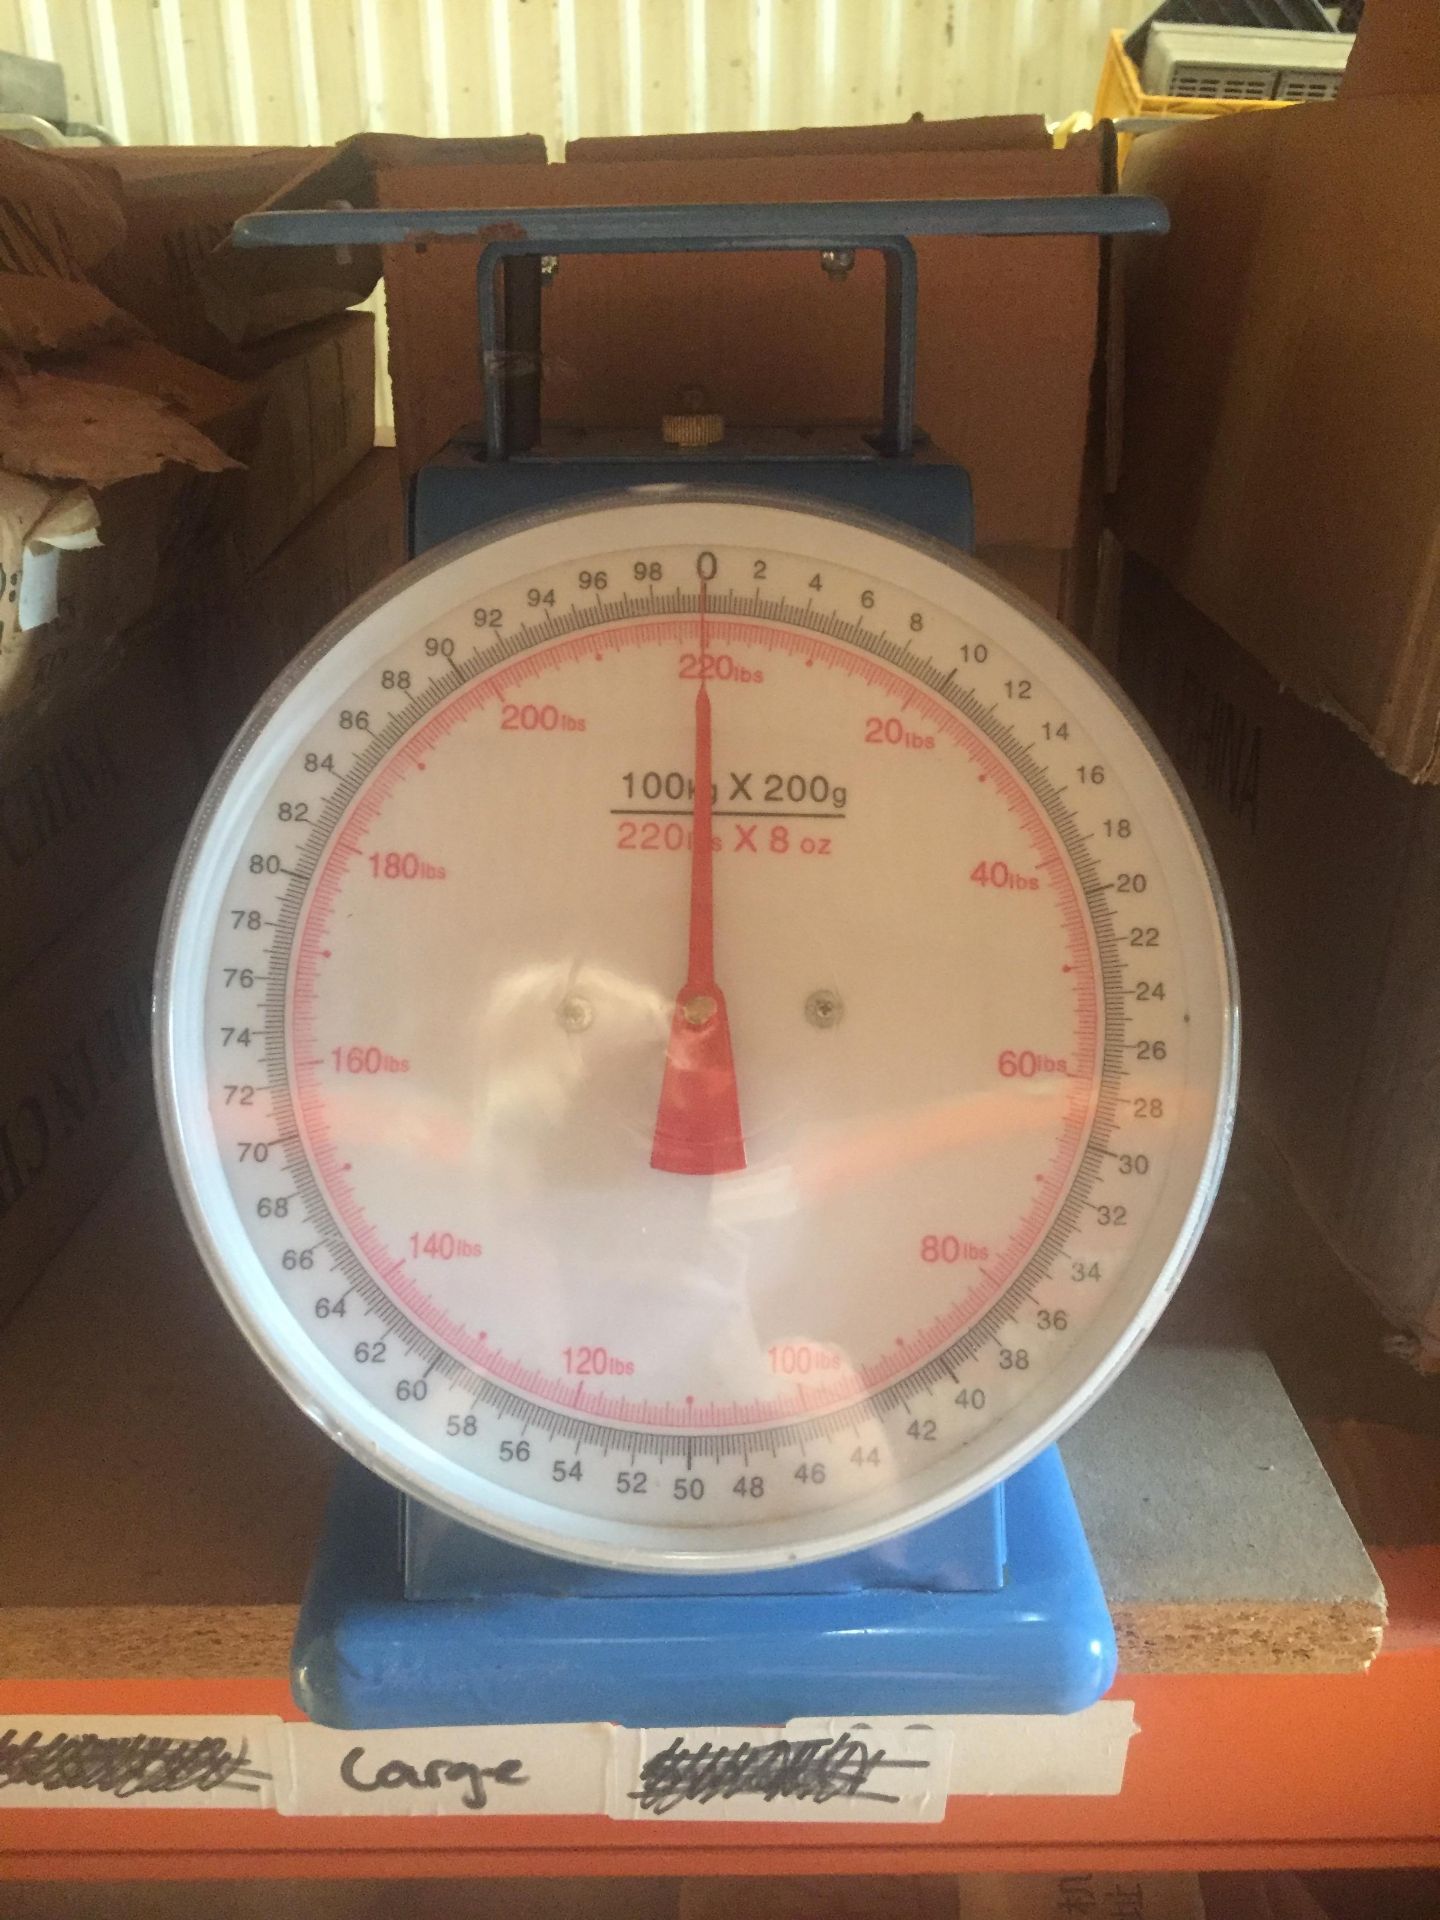 3 Large Postal Scales . Please see photos. All sizes and quantities are approx.